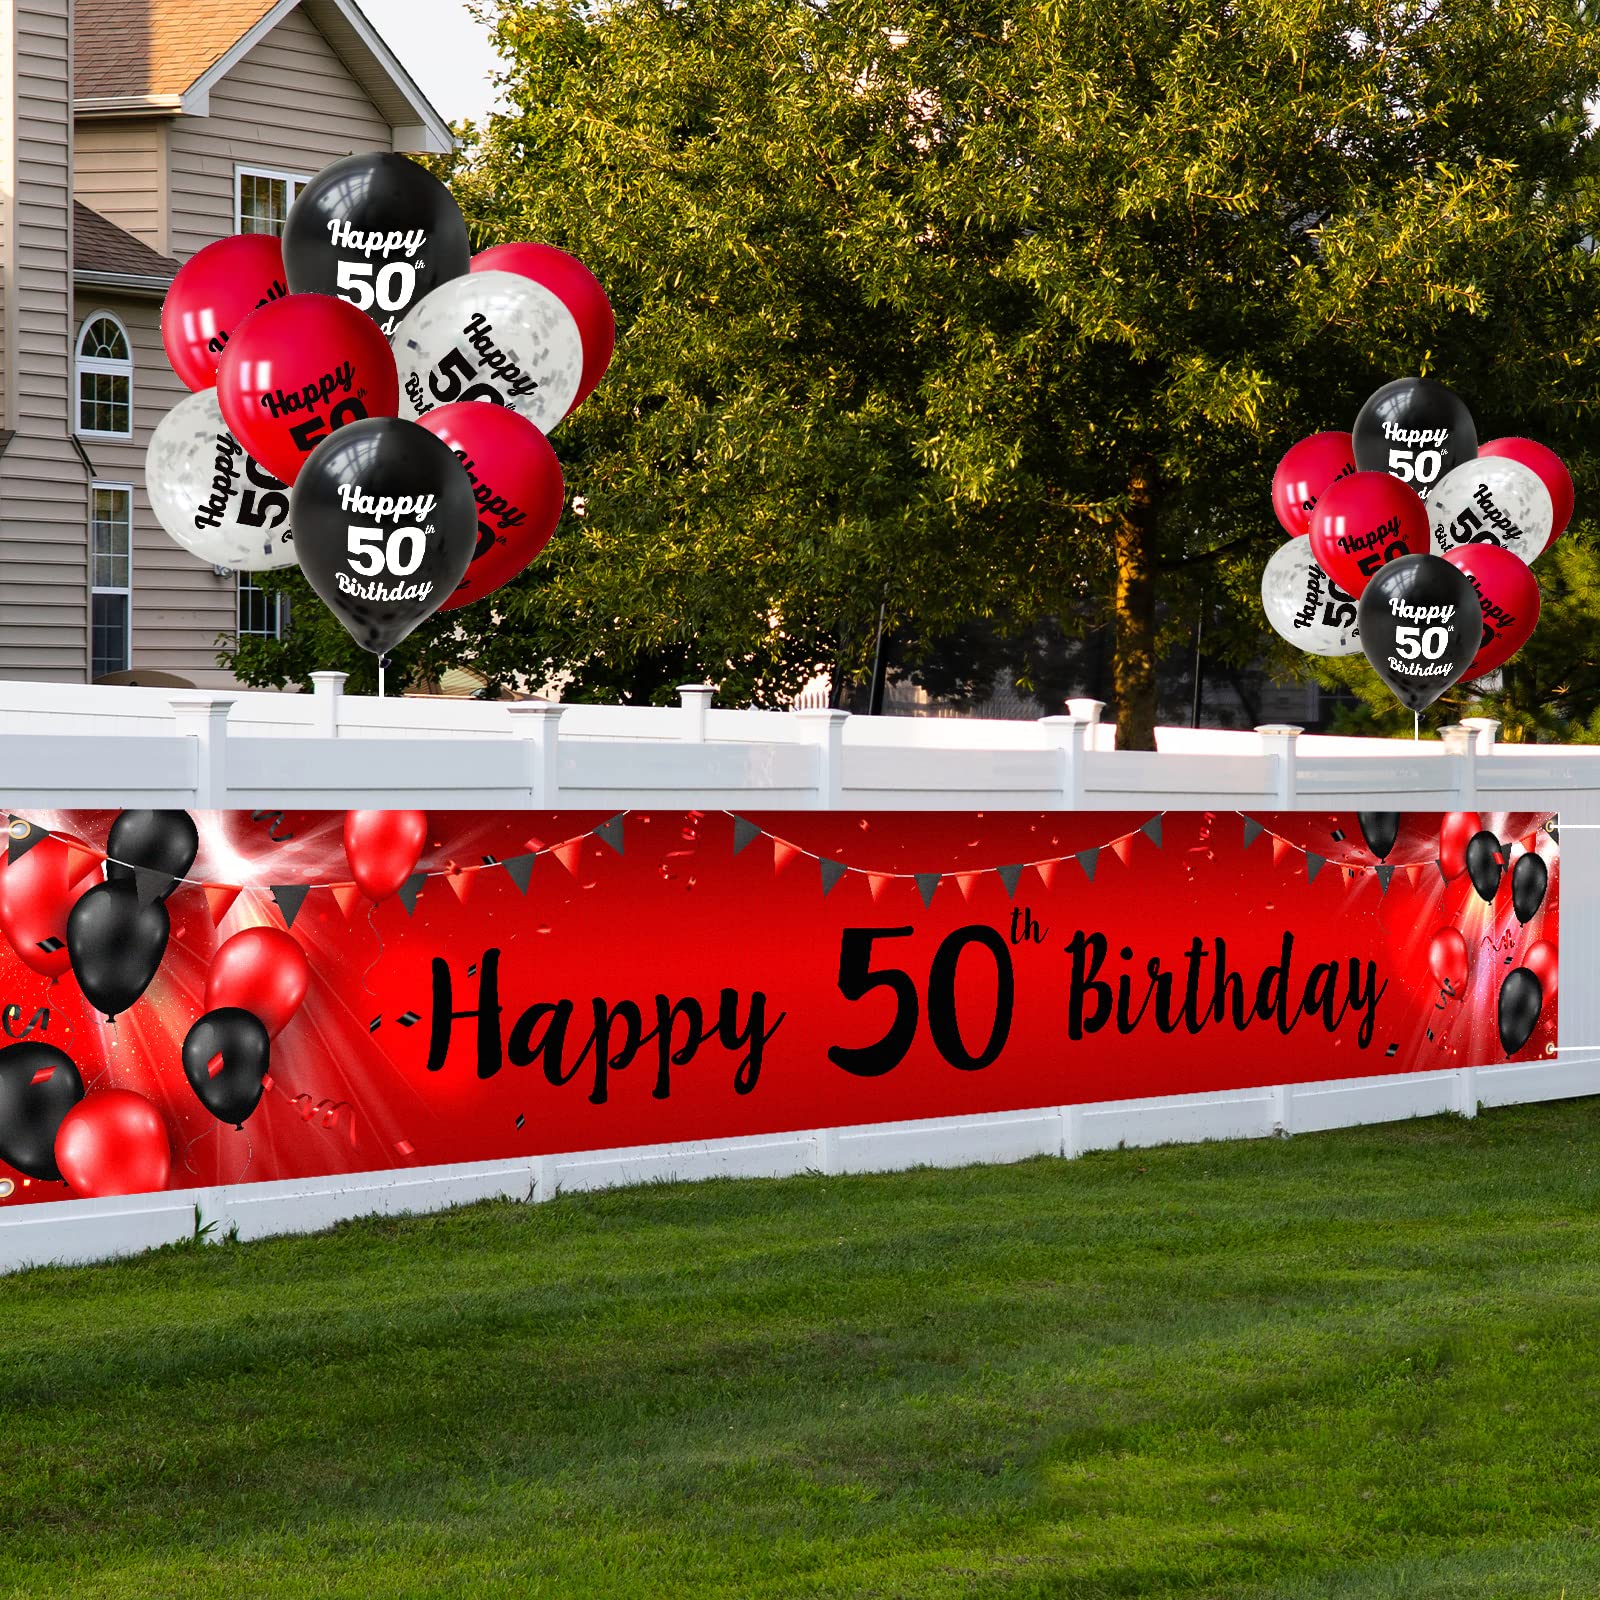 Happy 50th Birthday Yard Sign Banner with Balloons Arch Kit Red and Black - Cheers to 50 Years Old Birthday Party Theme Decorations Large Birthday Backdrop Banner for Men Women Supplies